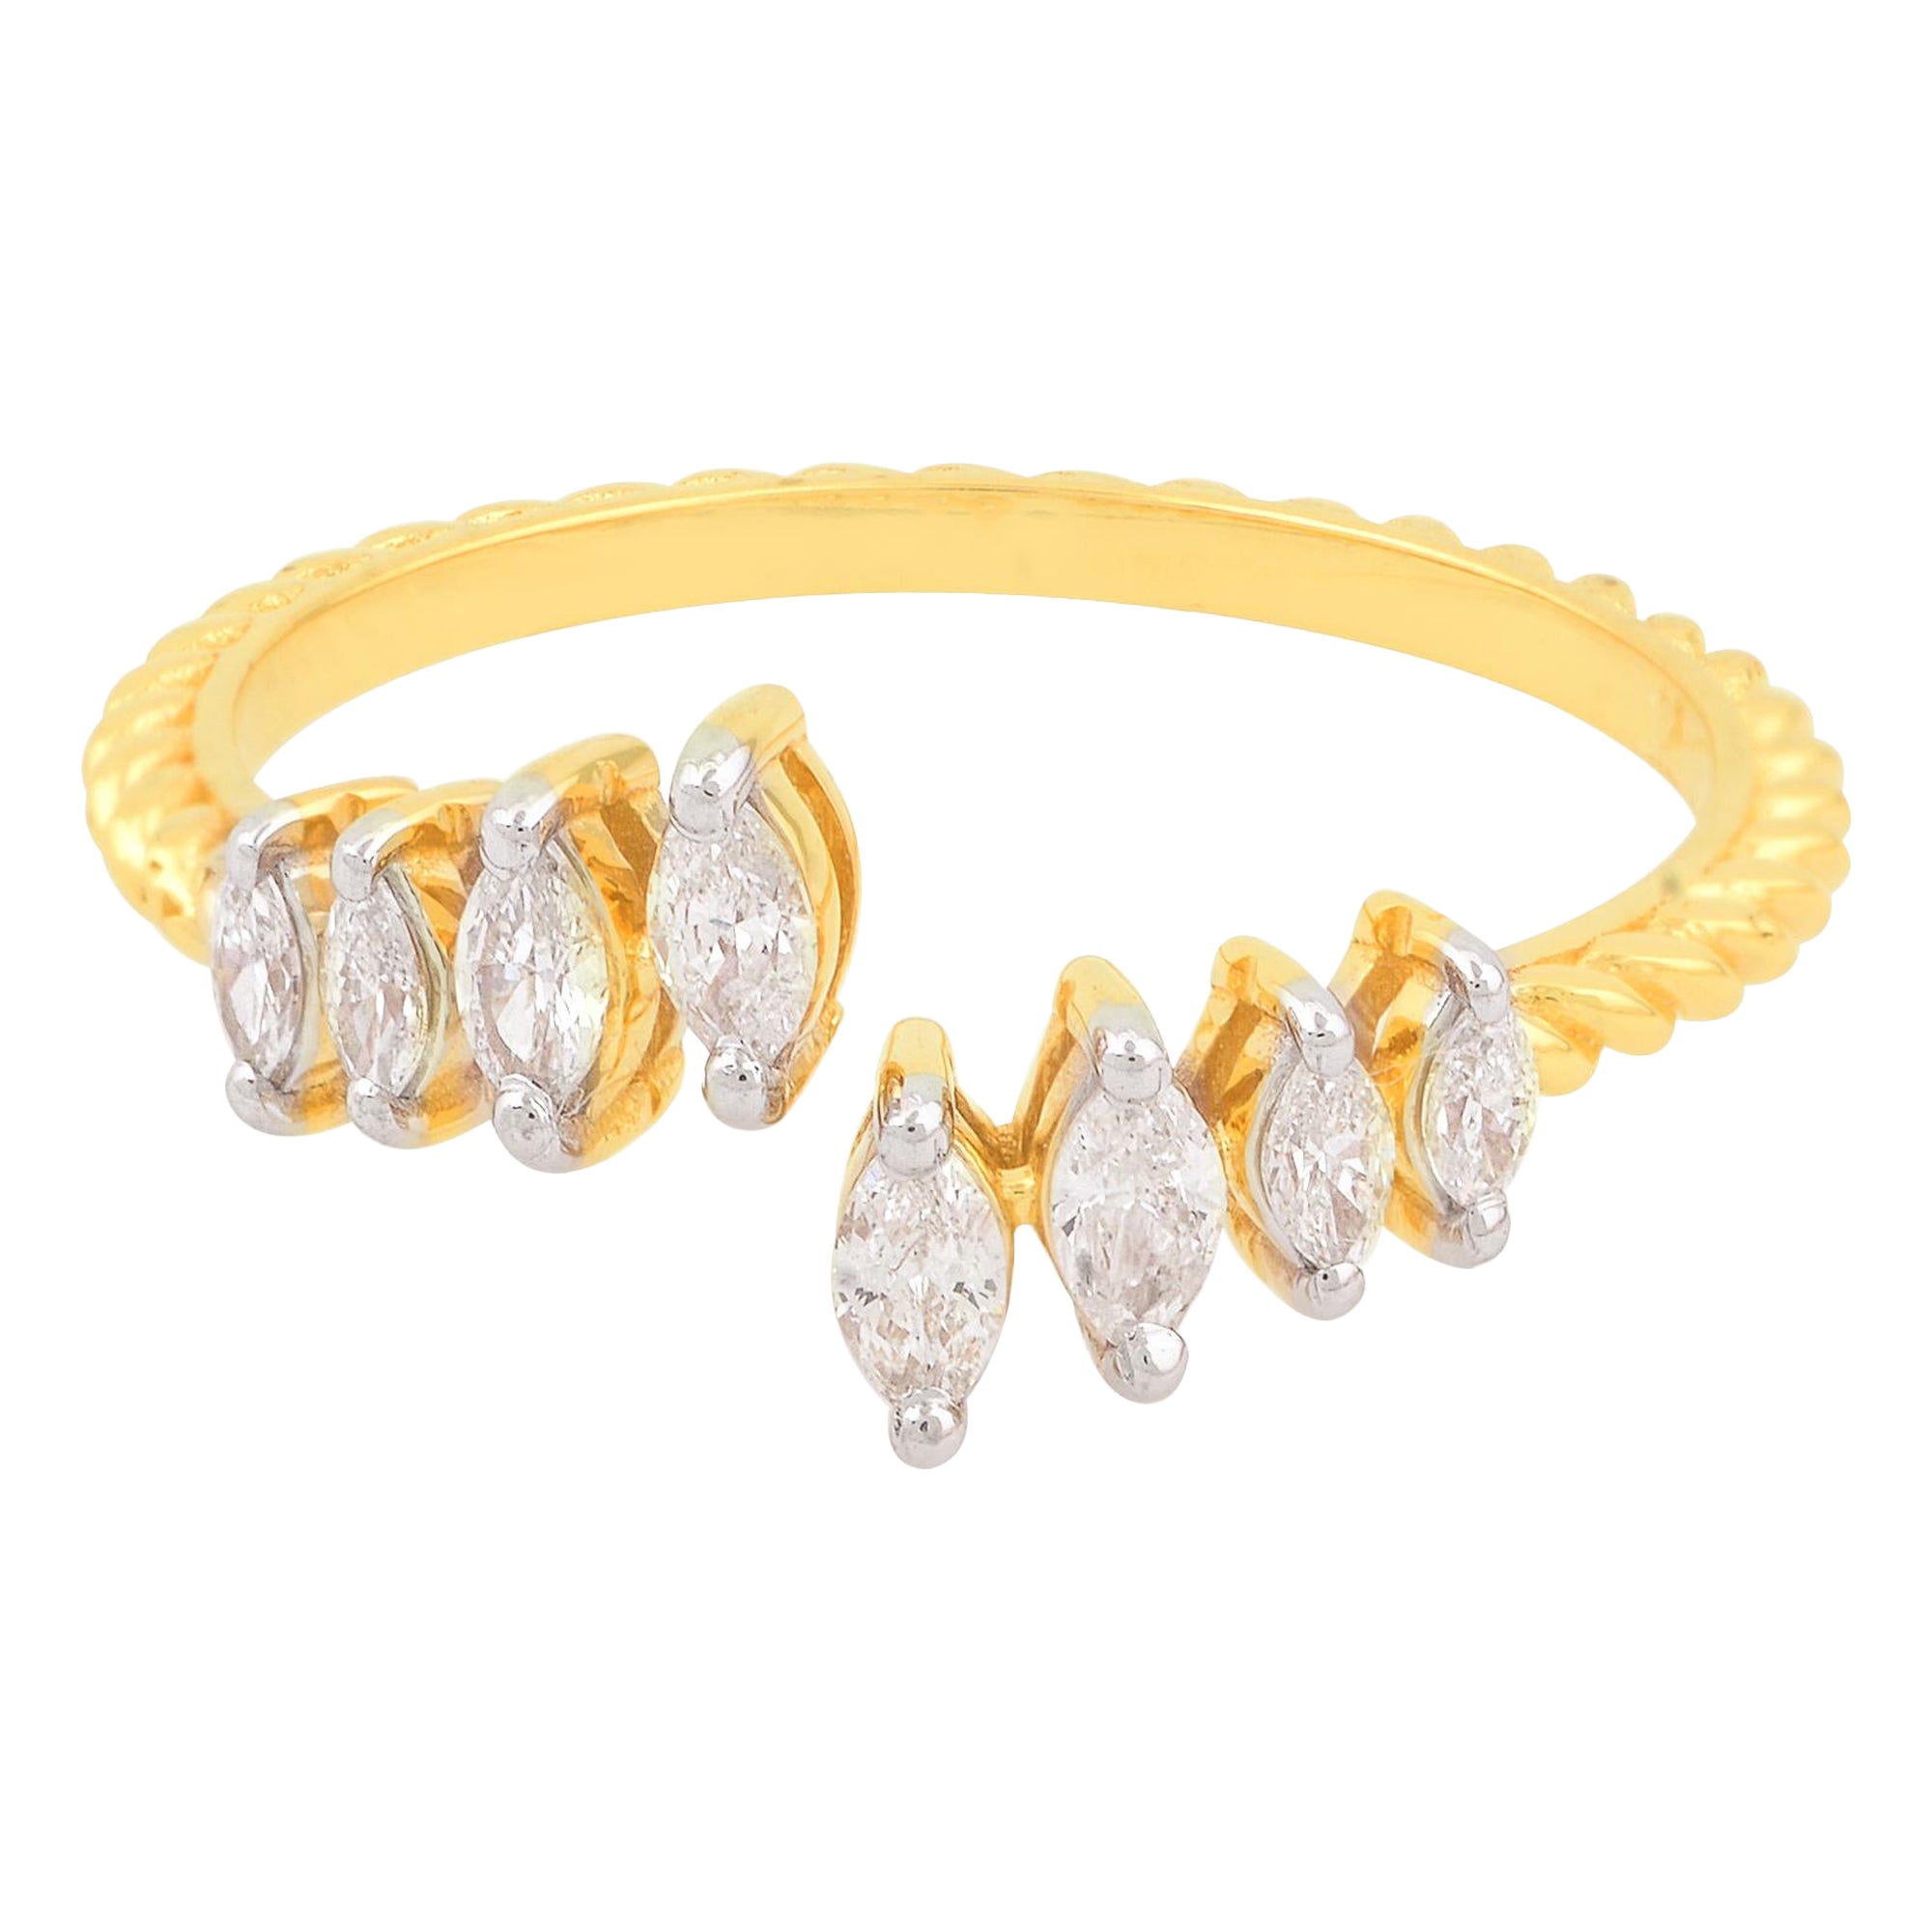 For Sale:  SI Clarity HI Color Marquise Diamond Wrap Ring 18 Karat Yellow Gold Fine Jewelry